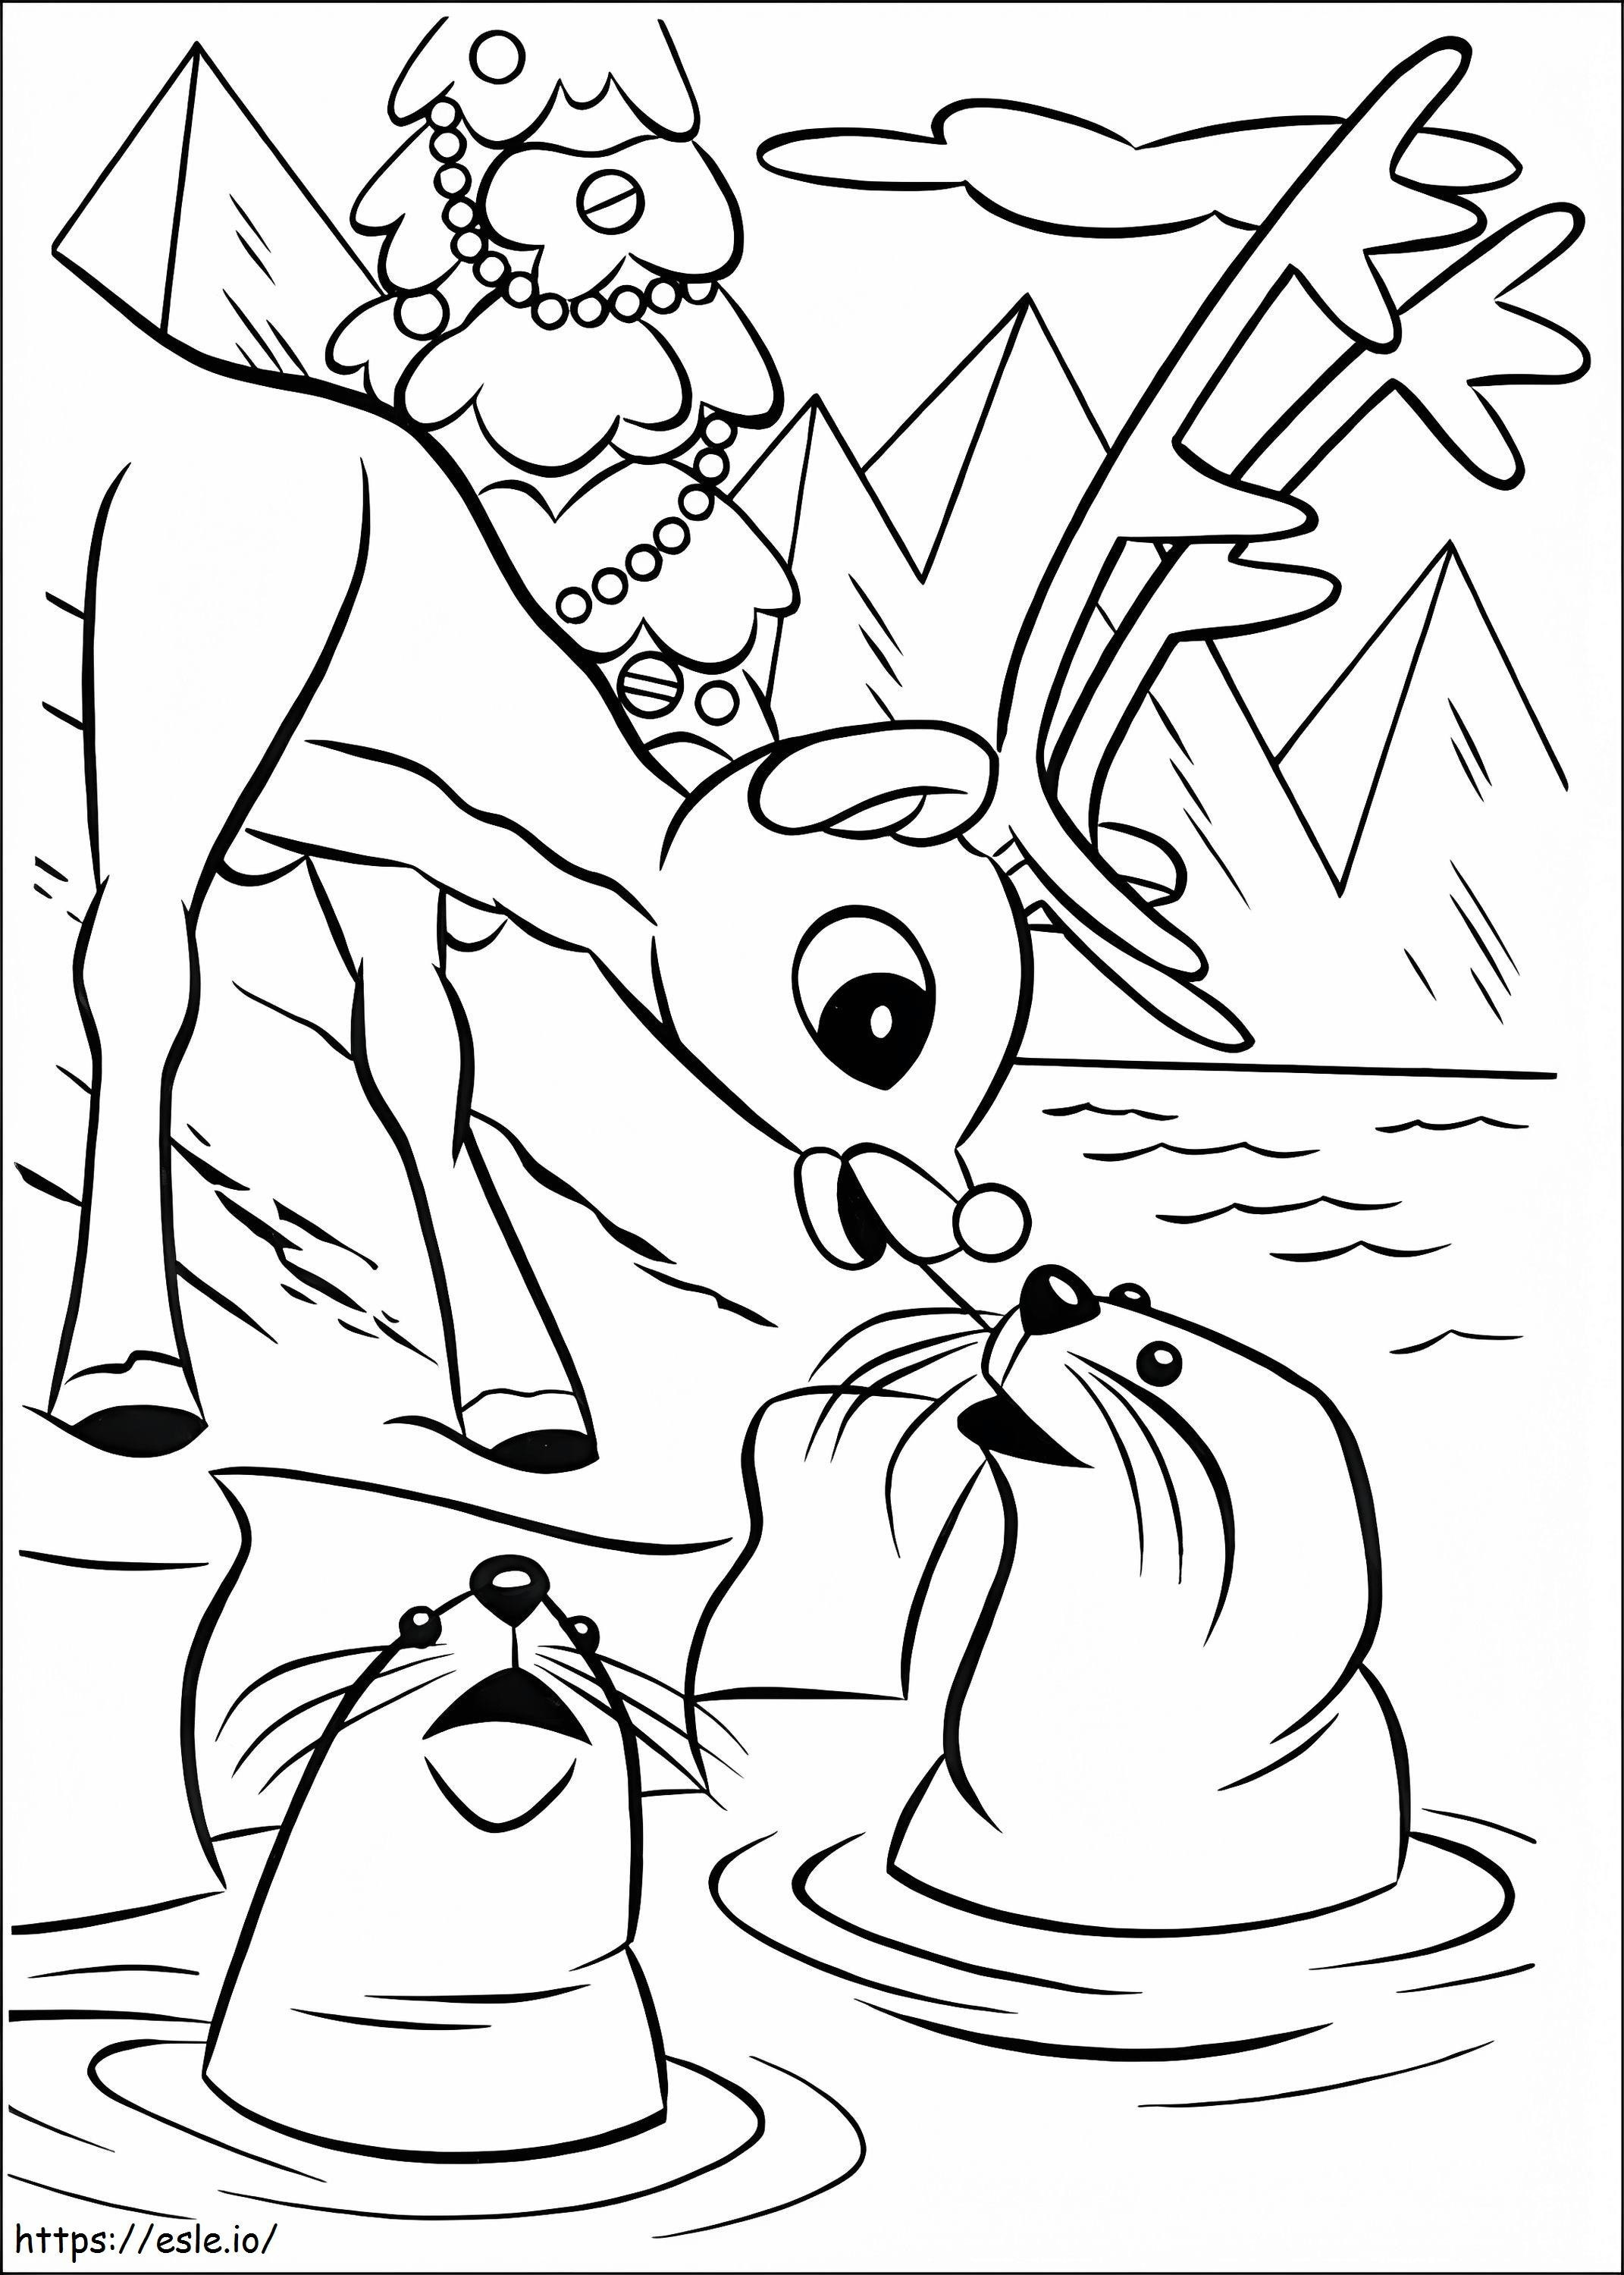 Rudolph 2 coloring page